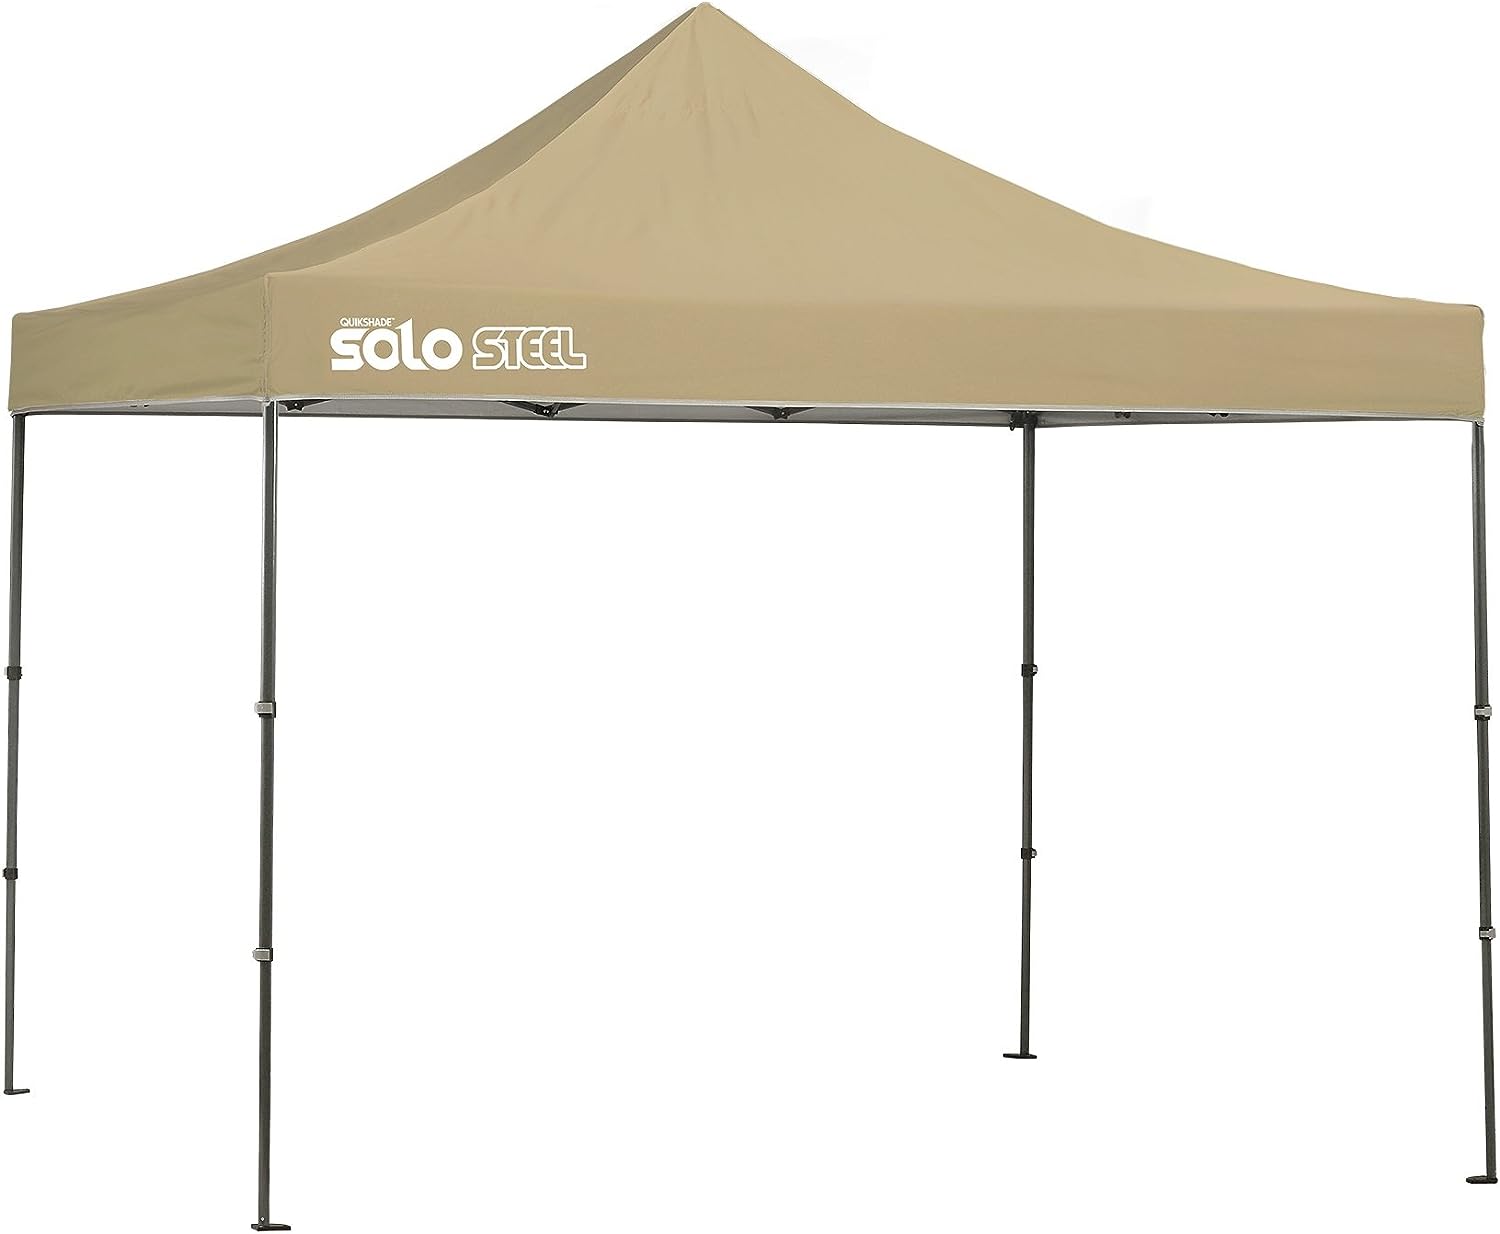  The photo showcases a Quik Shade Solo Steel 100 with a 10' x 10' khaki top, providing quick, reliable shelter for outdoor activities.